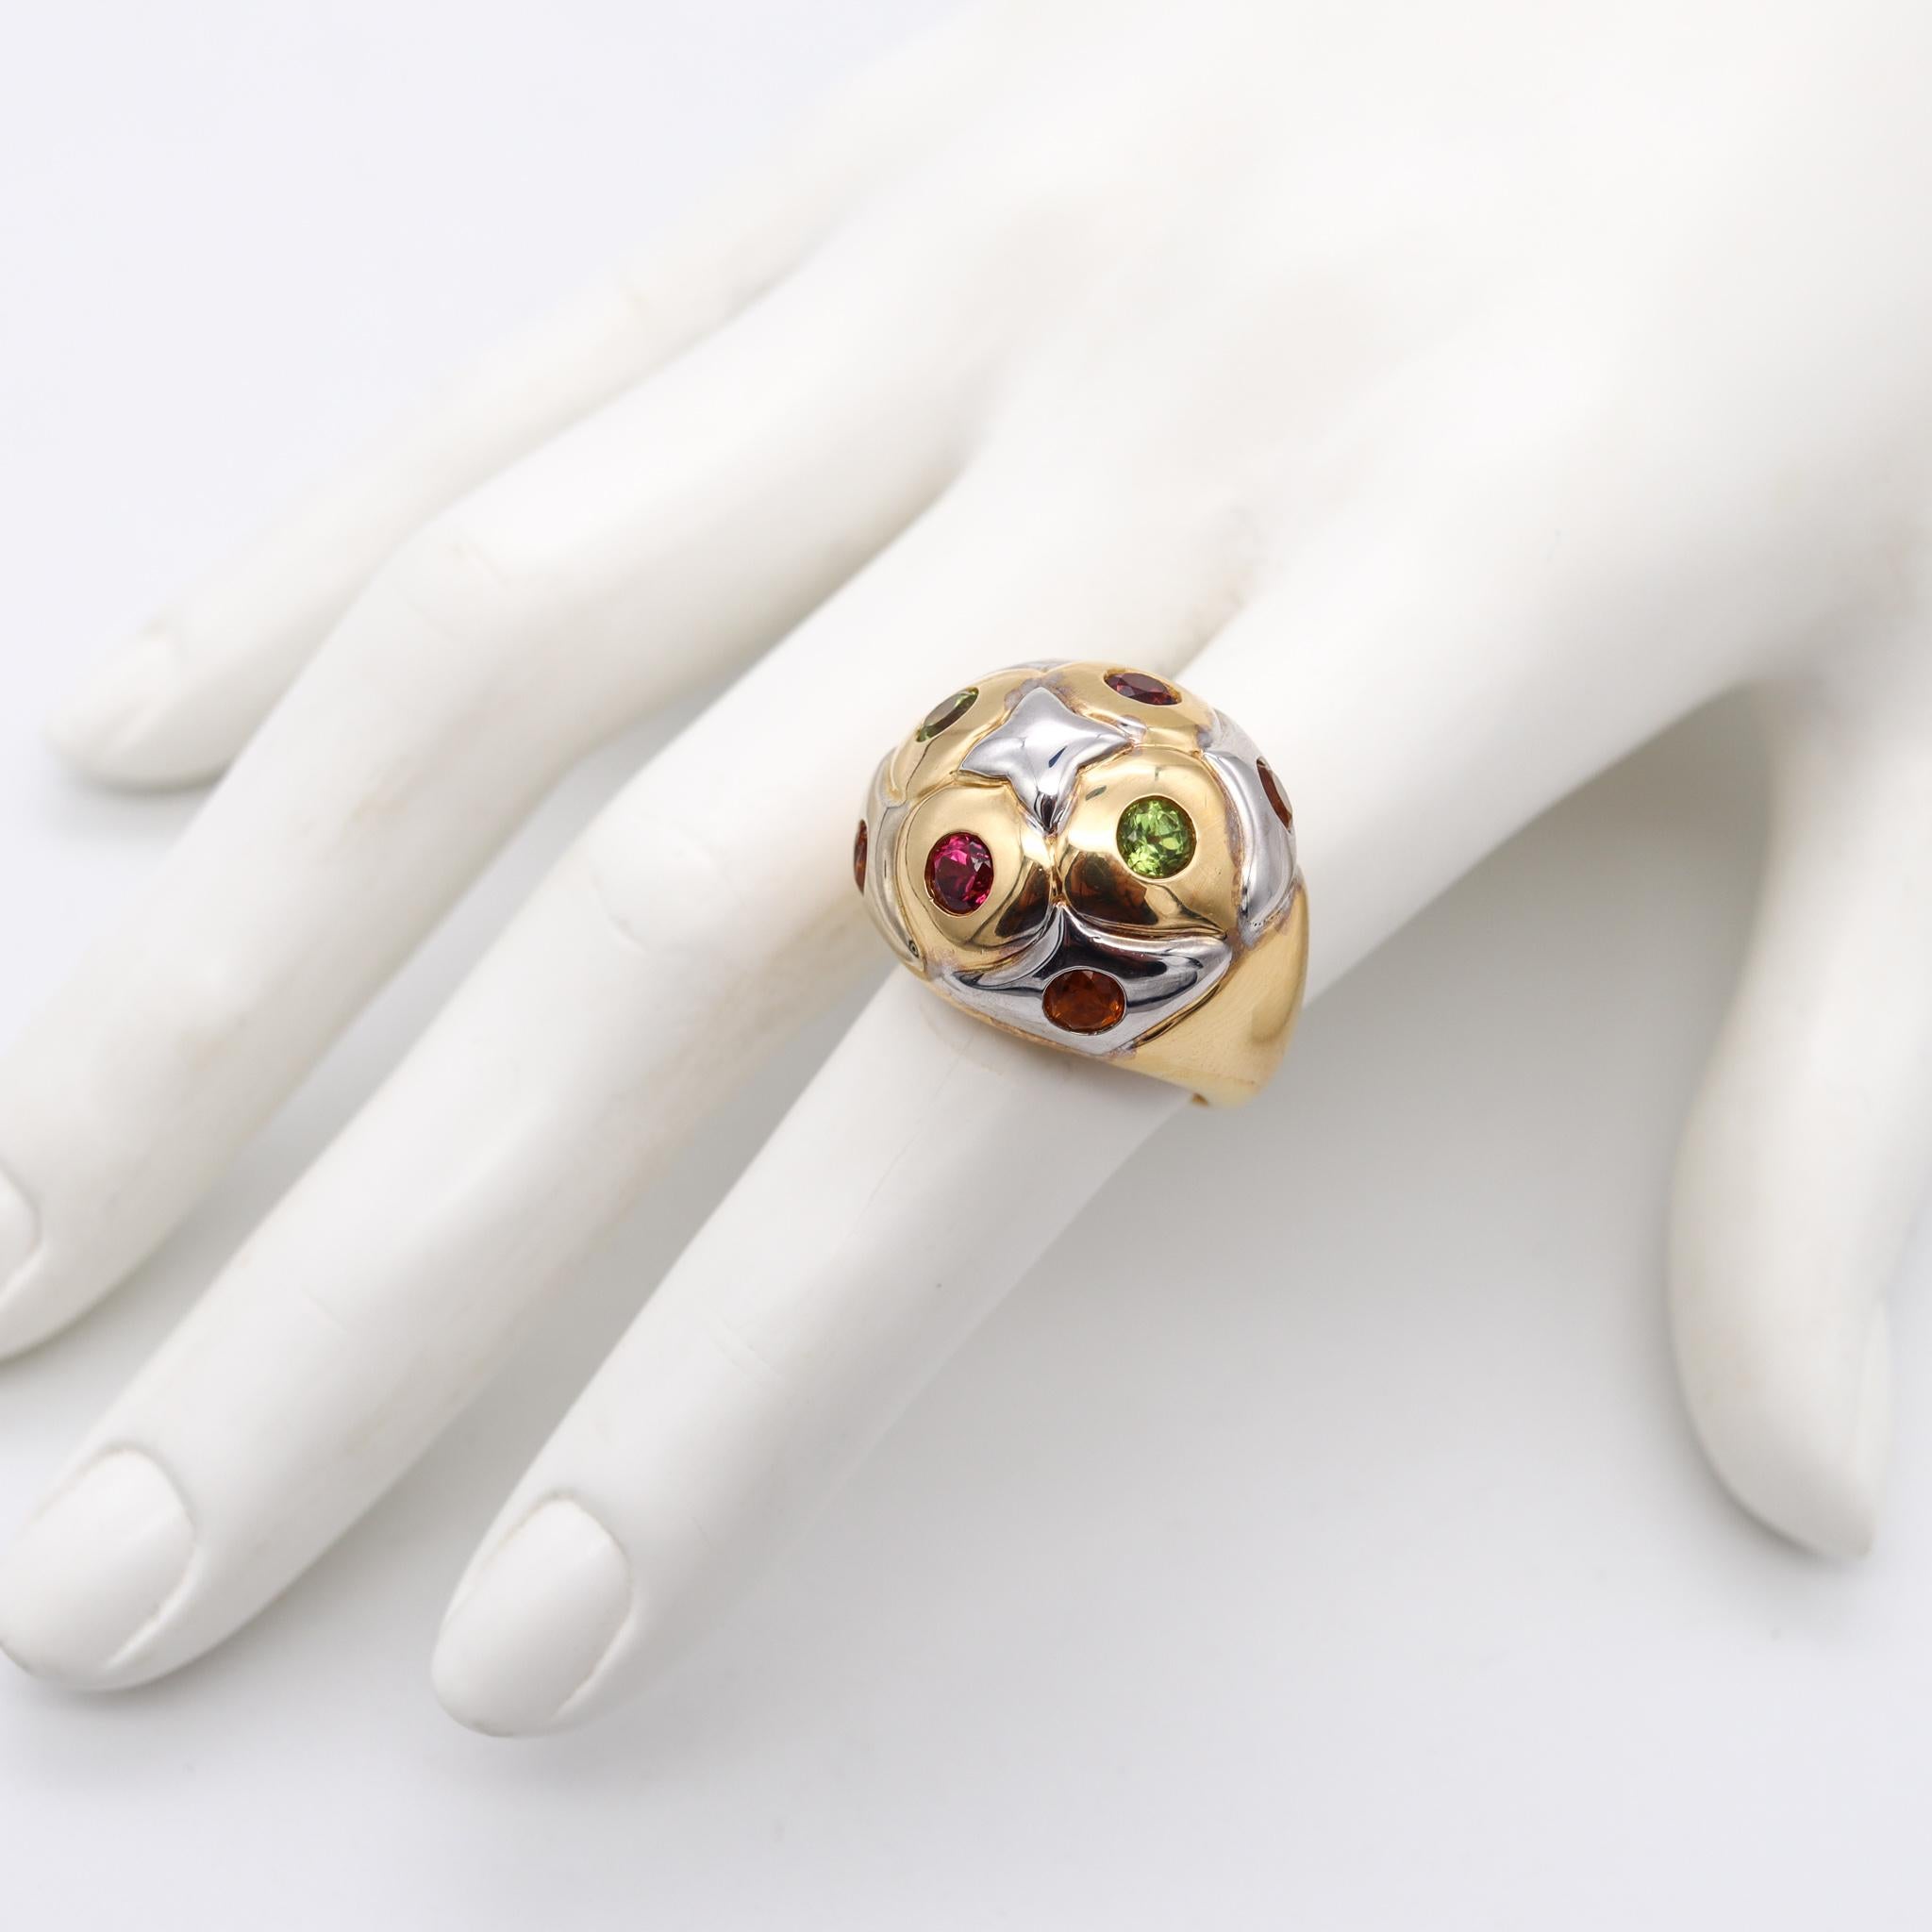 Modernist Bvlgari Roma Bombe Cocktail Ring Two Tones of 18Kt Gold with 1.80 Ctw Gemstones